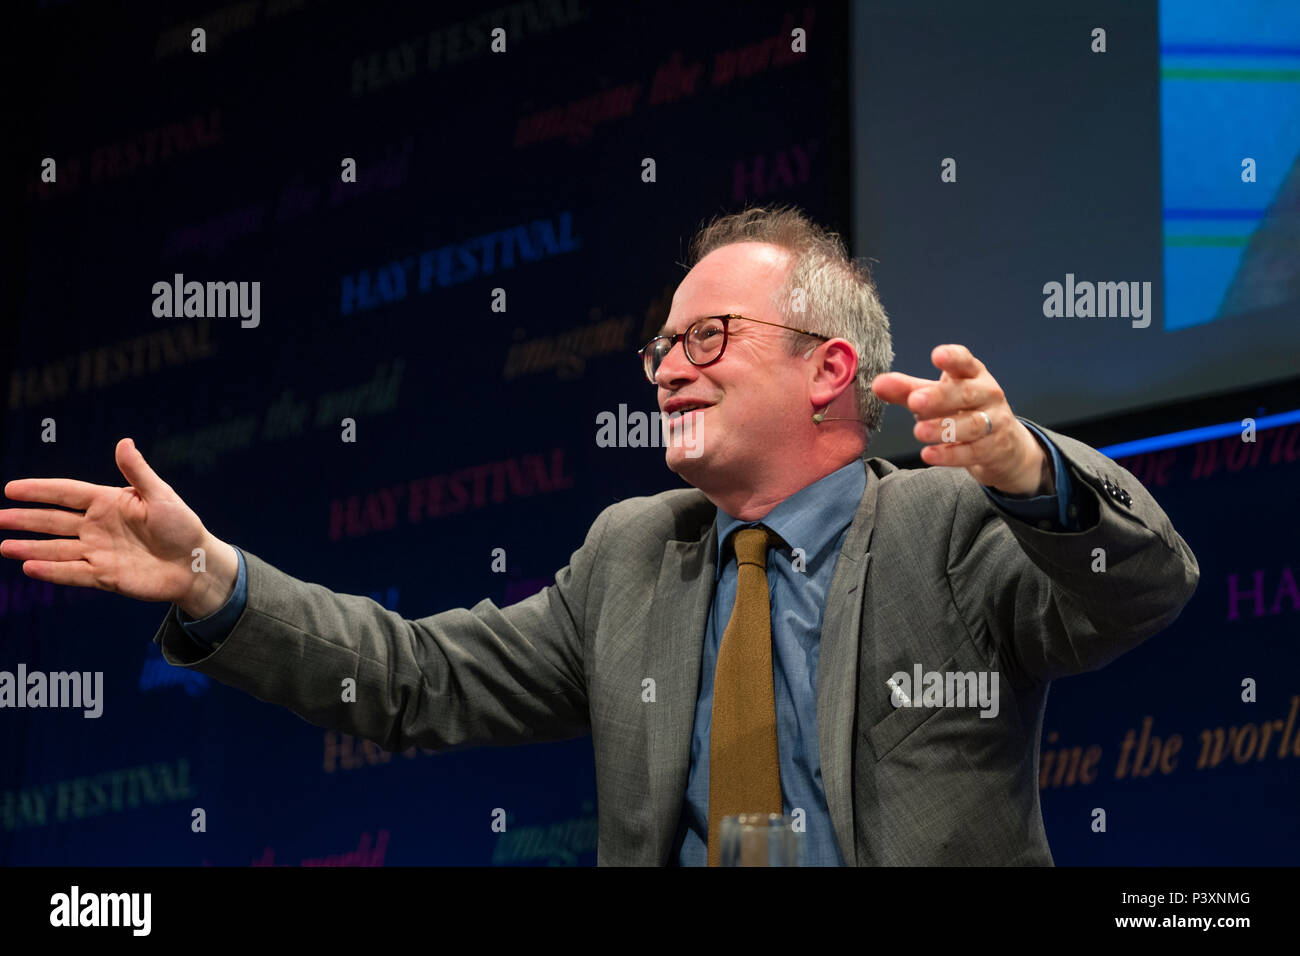 ROBIN INCE,,  English comedian, actor and writer. He is best known for presenting the BBC radio show The Infinite Monkey Cage with physicist Brian Cox.  Photographed at the 2018 Hay Festival of Literature and the Arts.  The annual festival  in the small town of Hay on Wye on the Welsh borders , attracts  writers and thinkers from across the globe for 10 days of celebrations of the best of the written word, political though  and literary debate Stock Photo